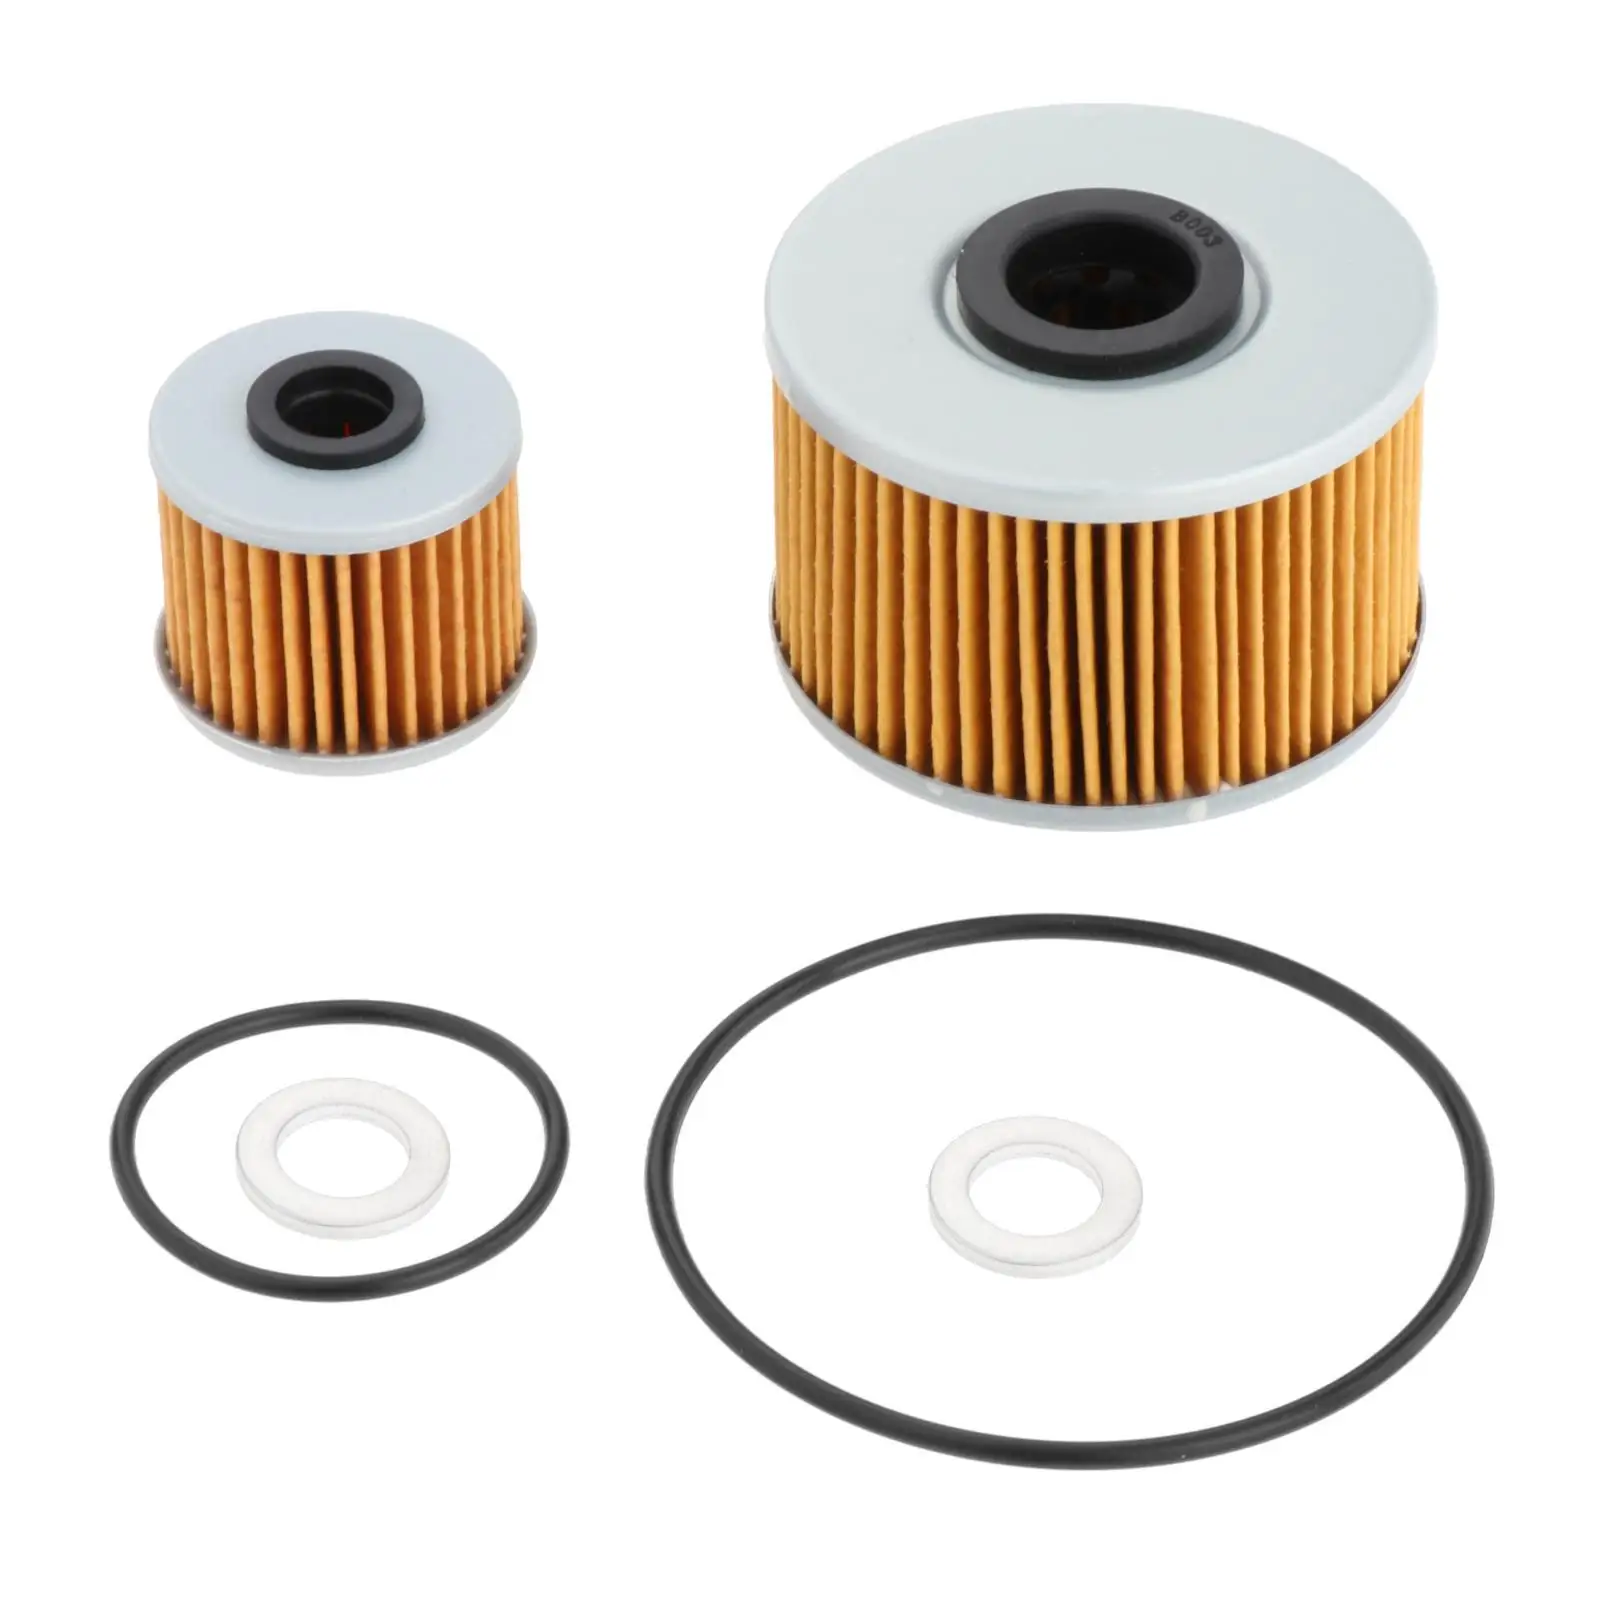 Oil Filter Replacement Kit 15412HP7A01 91302PA9003 Fit for Honda Crf1000L